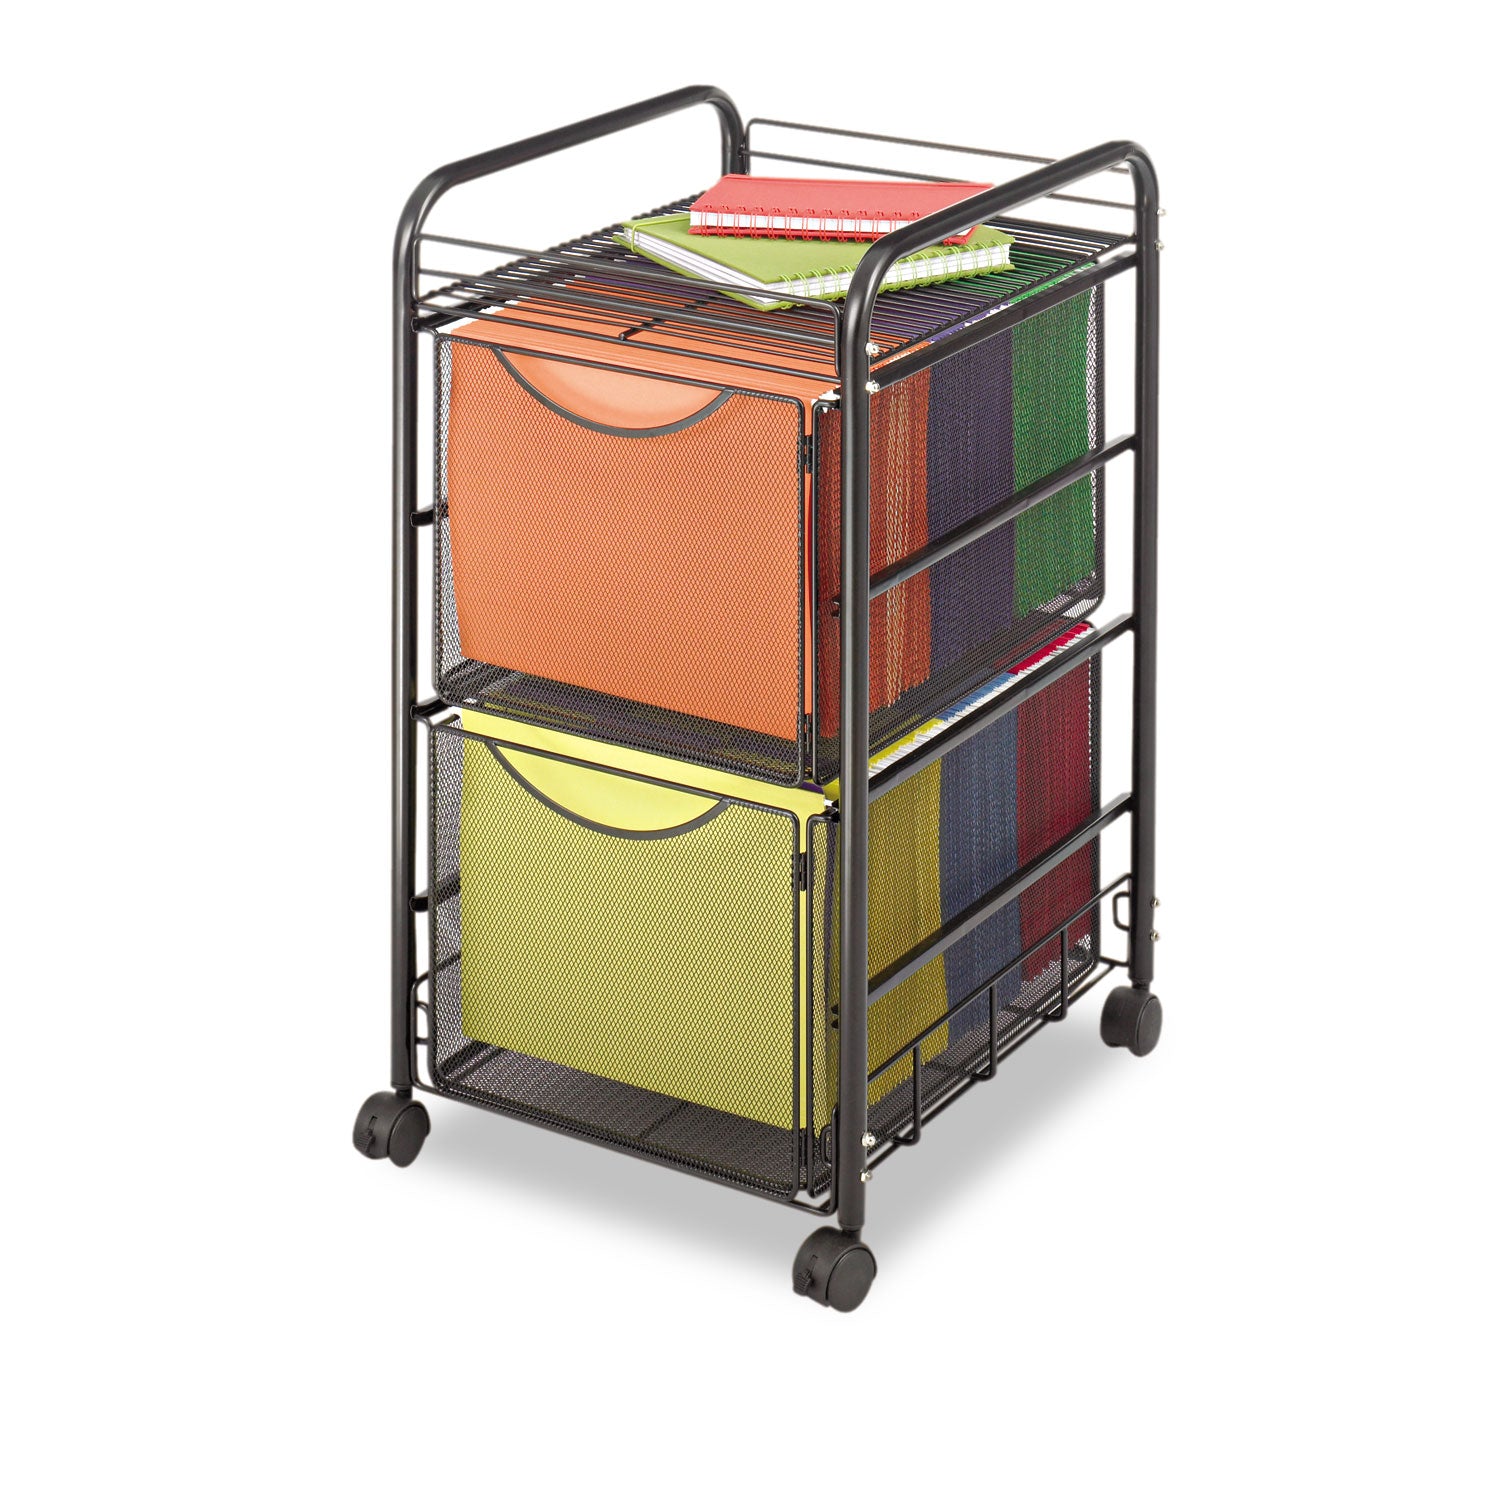 Safco Onyx Double Mesh Mobile File Cart - 2 Shelf - 2 Drawer - 4 Casters - 1.50" Caster Size - x 15.8" Width x 17" Depth x 27" Height - Black Steel Frame - Black - 1 Each - 1